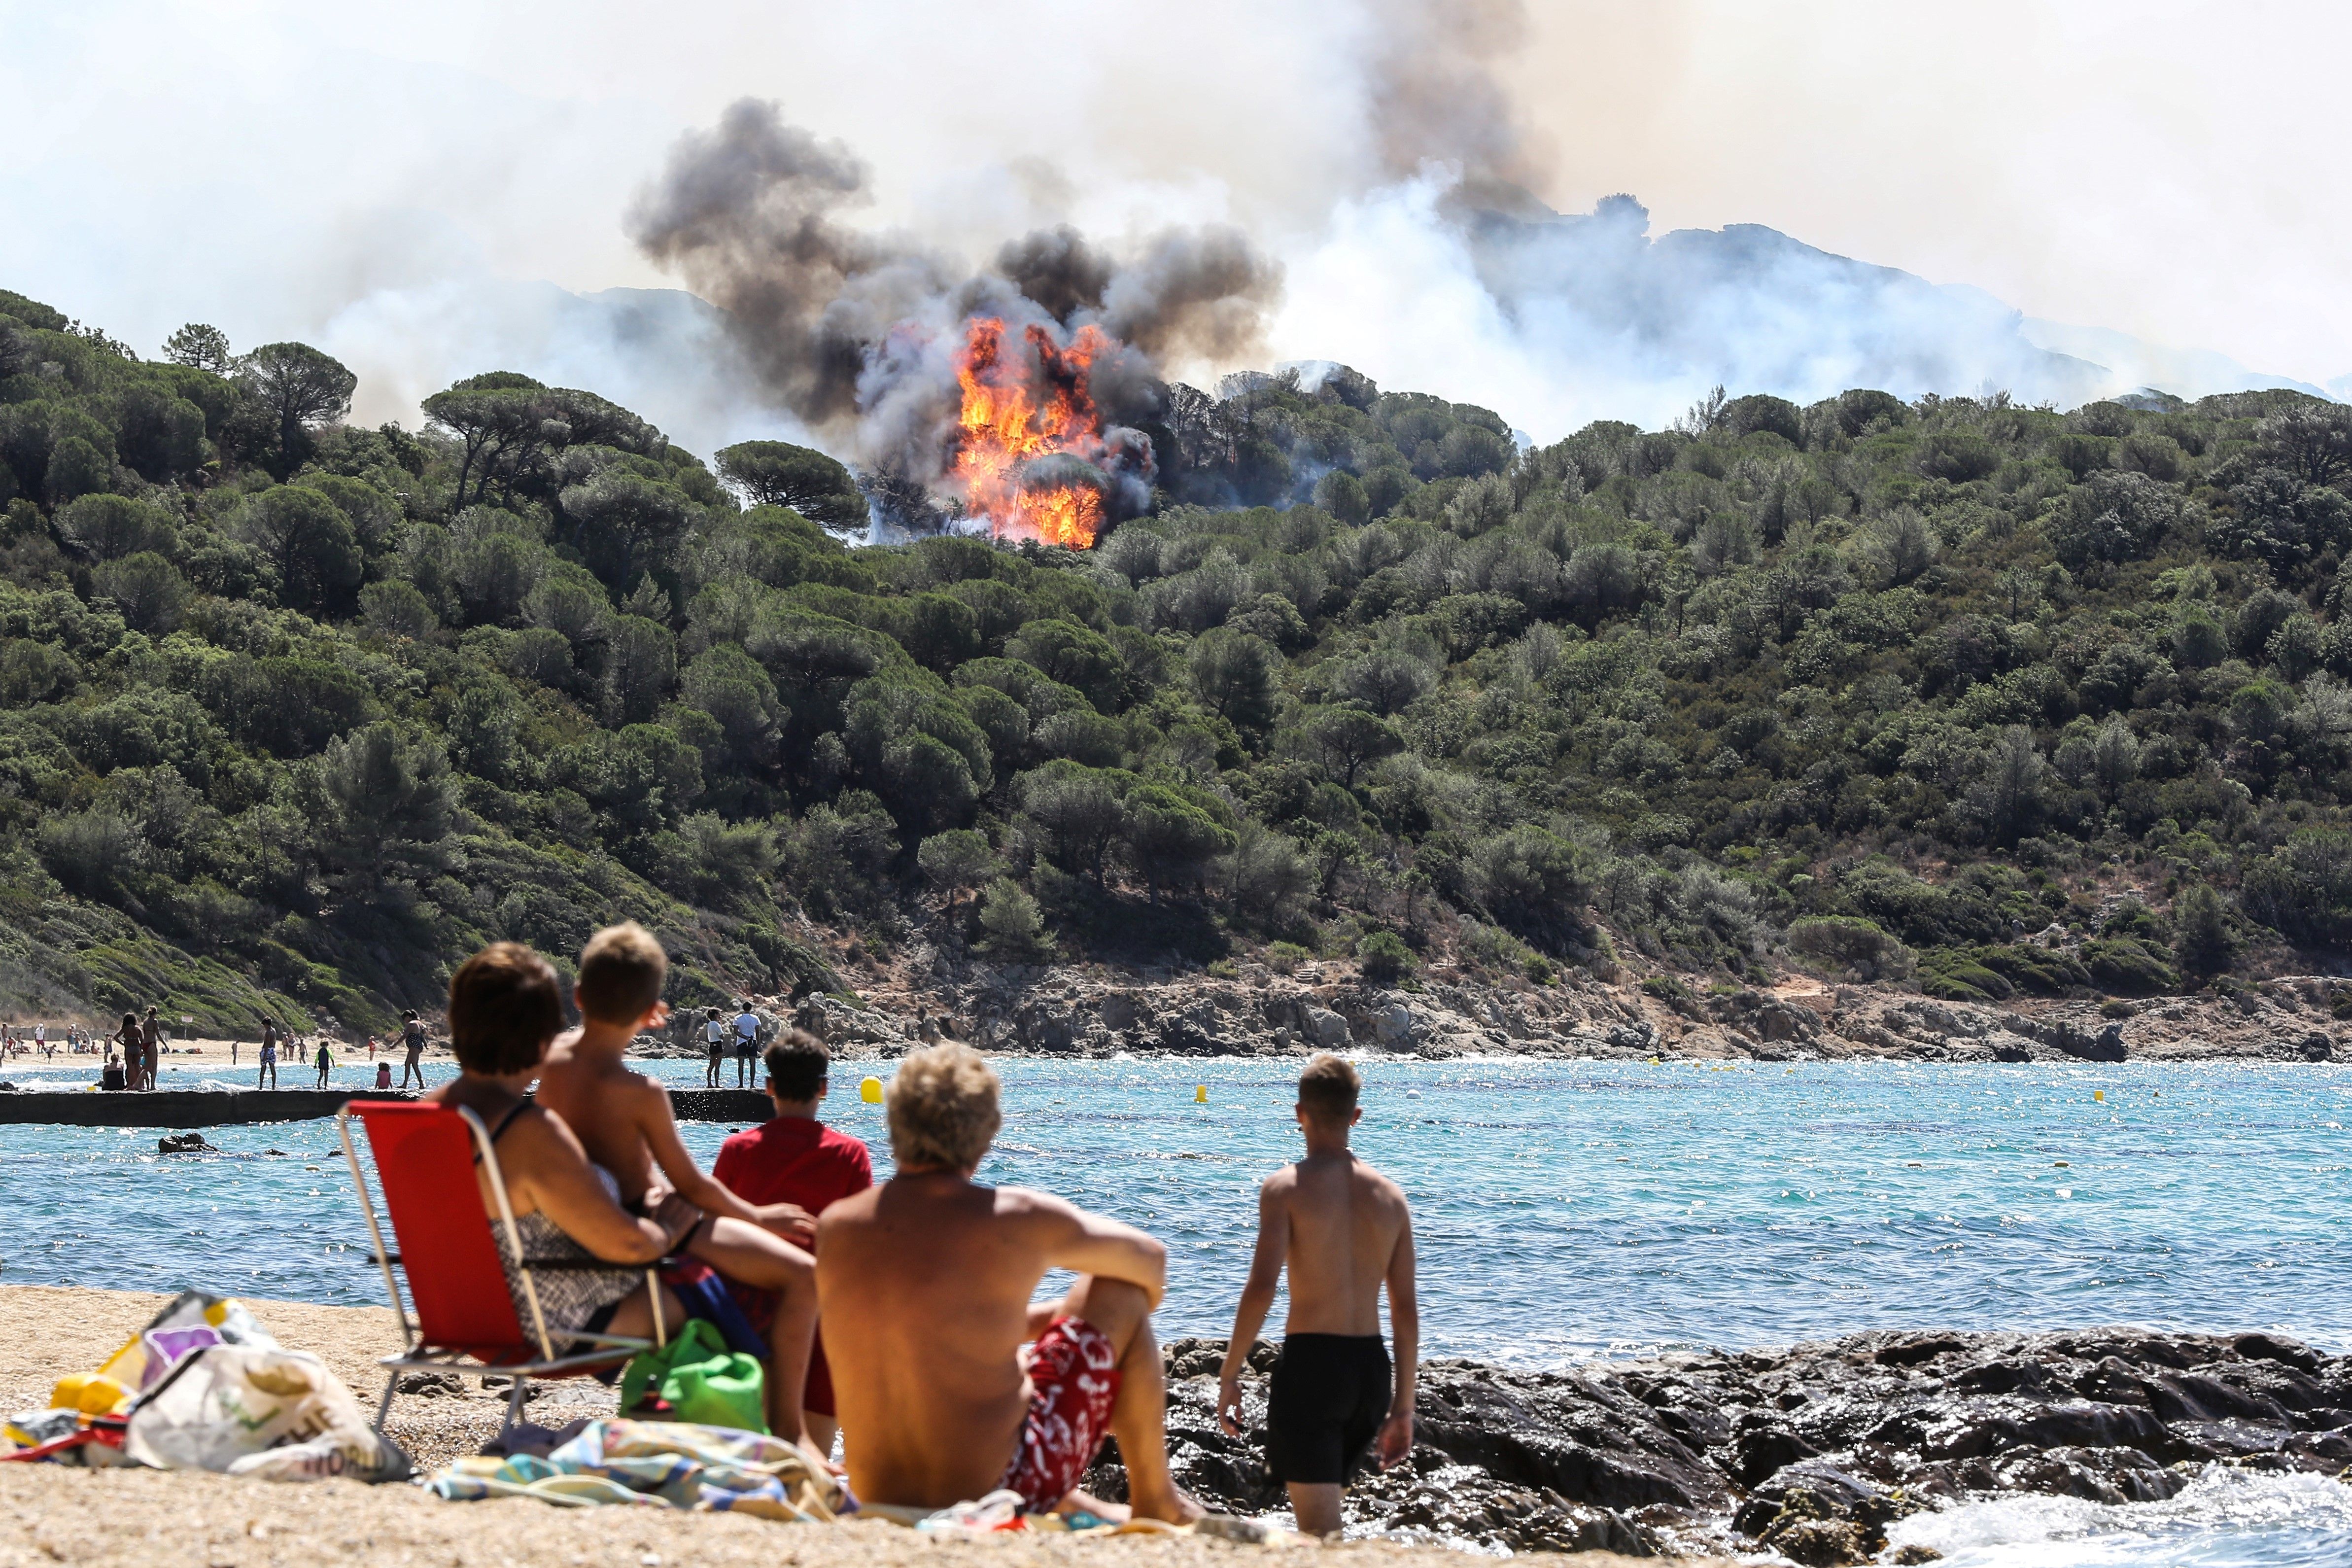 People enjoy the beach as they look at a forest fire in La Croix-Valmer, near Saint-Tropez, France, July 25, 2017. (Valery Hache—AFP/Getty Images)